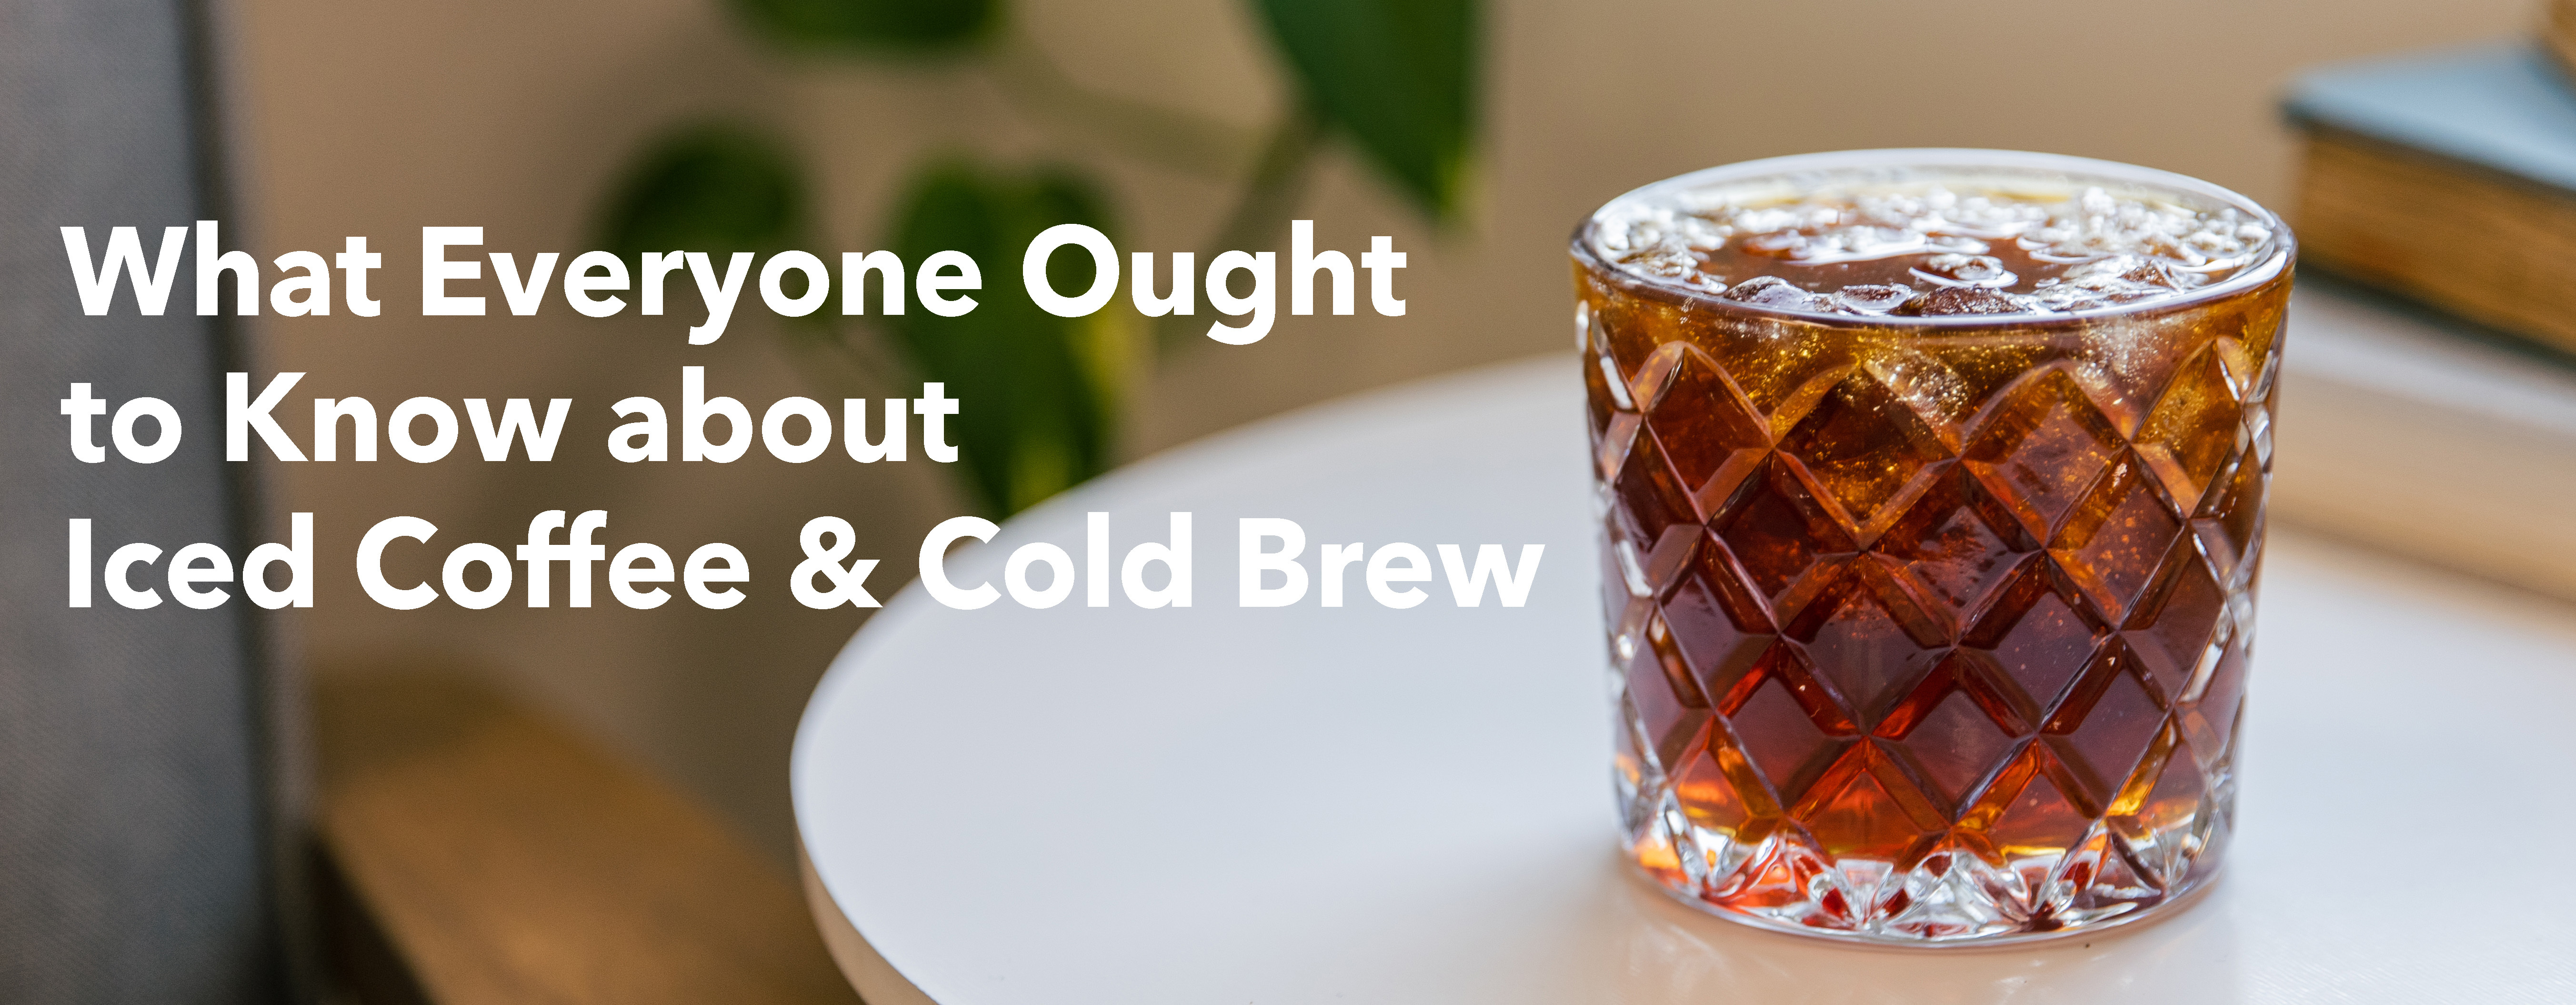 https://cdn11.bigcommerce.com/s-6h7ychjk4/product_images/uploaded_images/iced-coffee-colde-brew-blog-banner.jpg